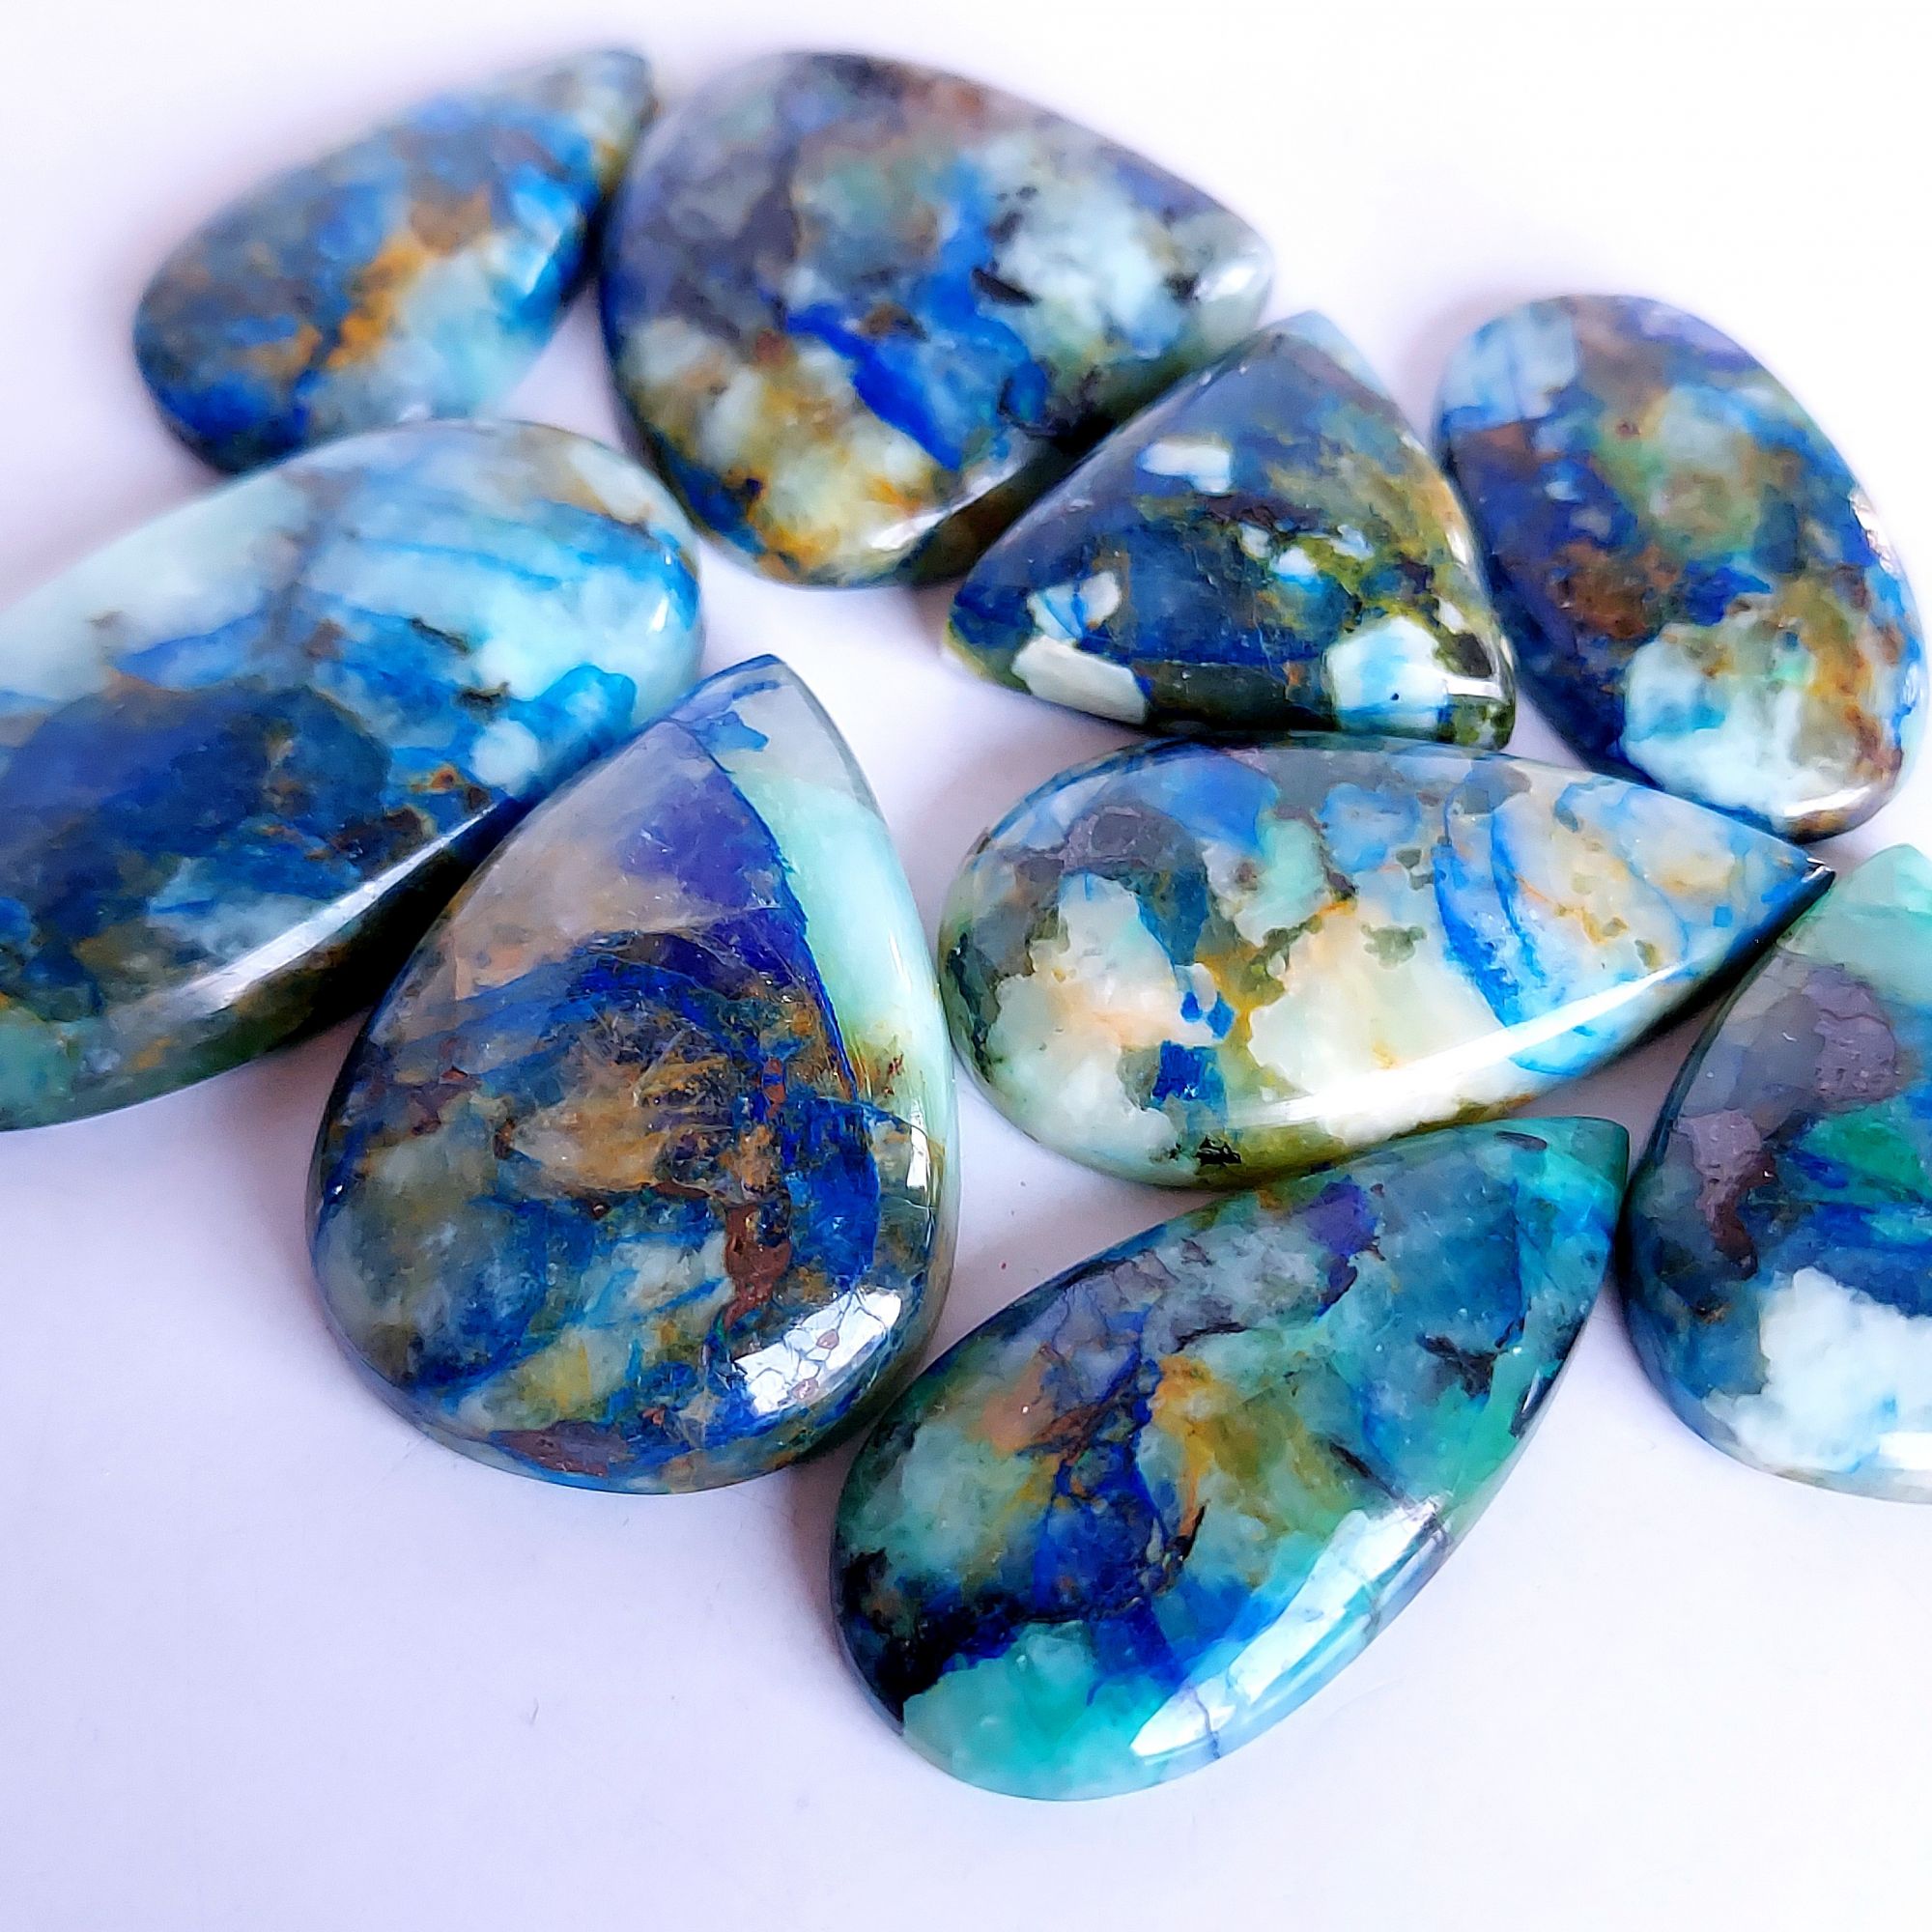 297.Cts 9 Pcs Natural Smooth Azurite Mix Loose Gemstone Cabochon Lot Size 40x24 27x19mm Wholesale Gemstone For jewelry